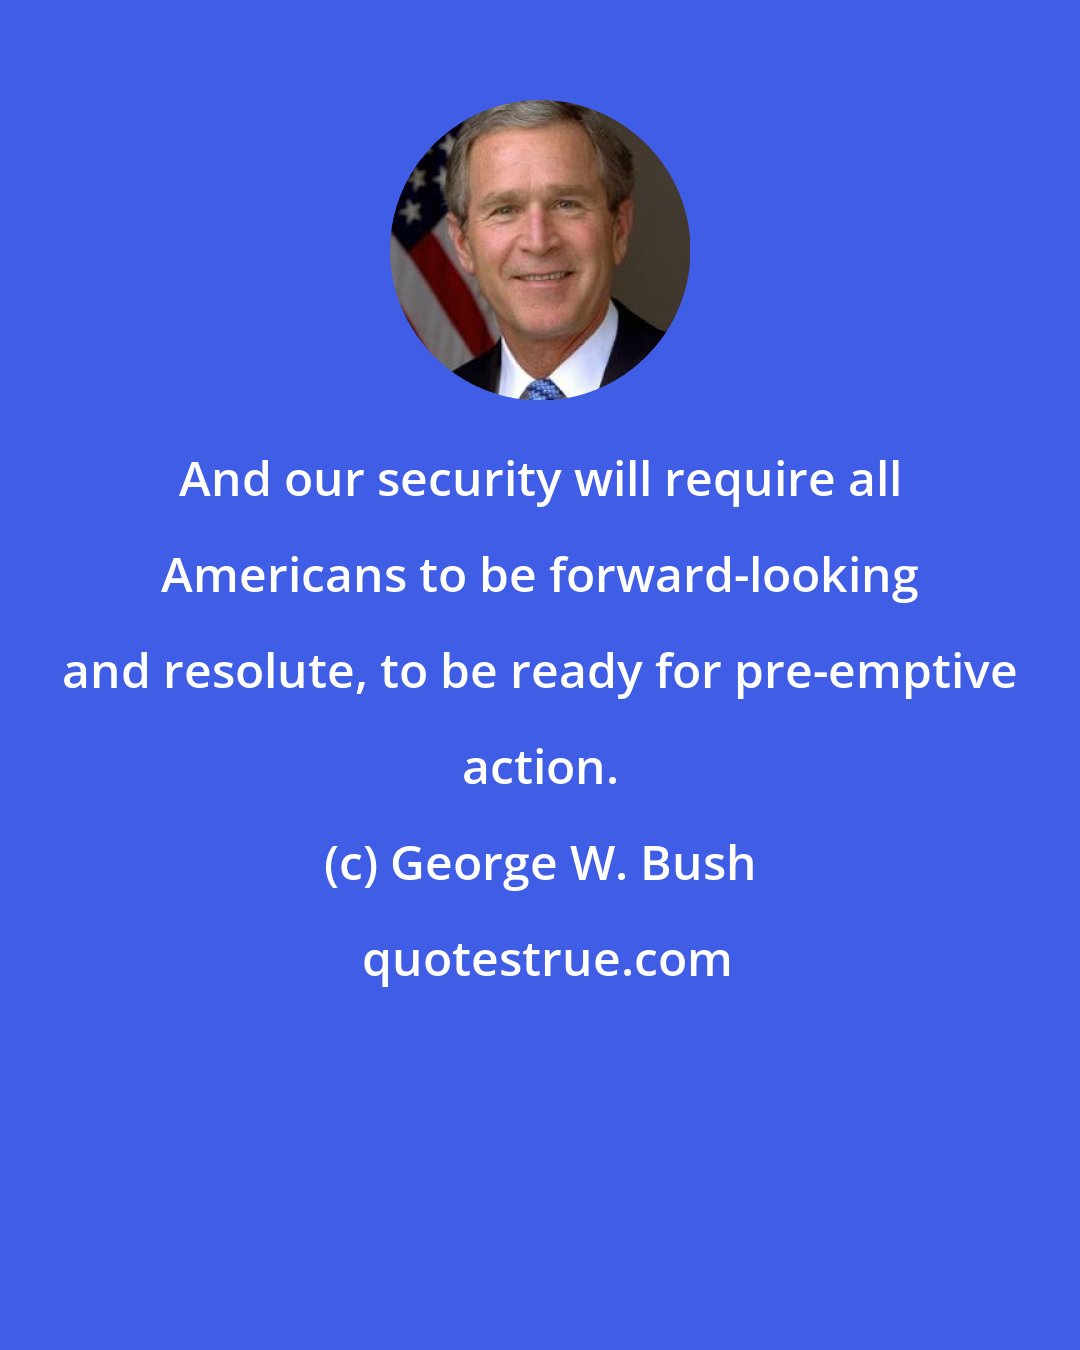 George W. Bush: And our security will require all Americans to be forward-looking and resolute, to be ready for pre-emptive action.